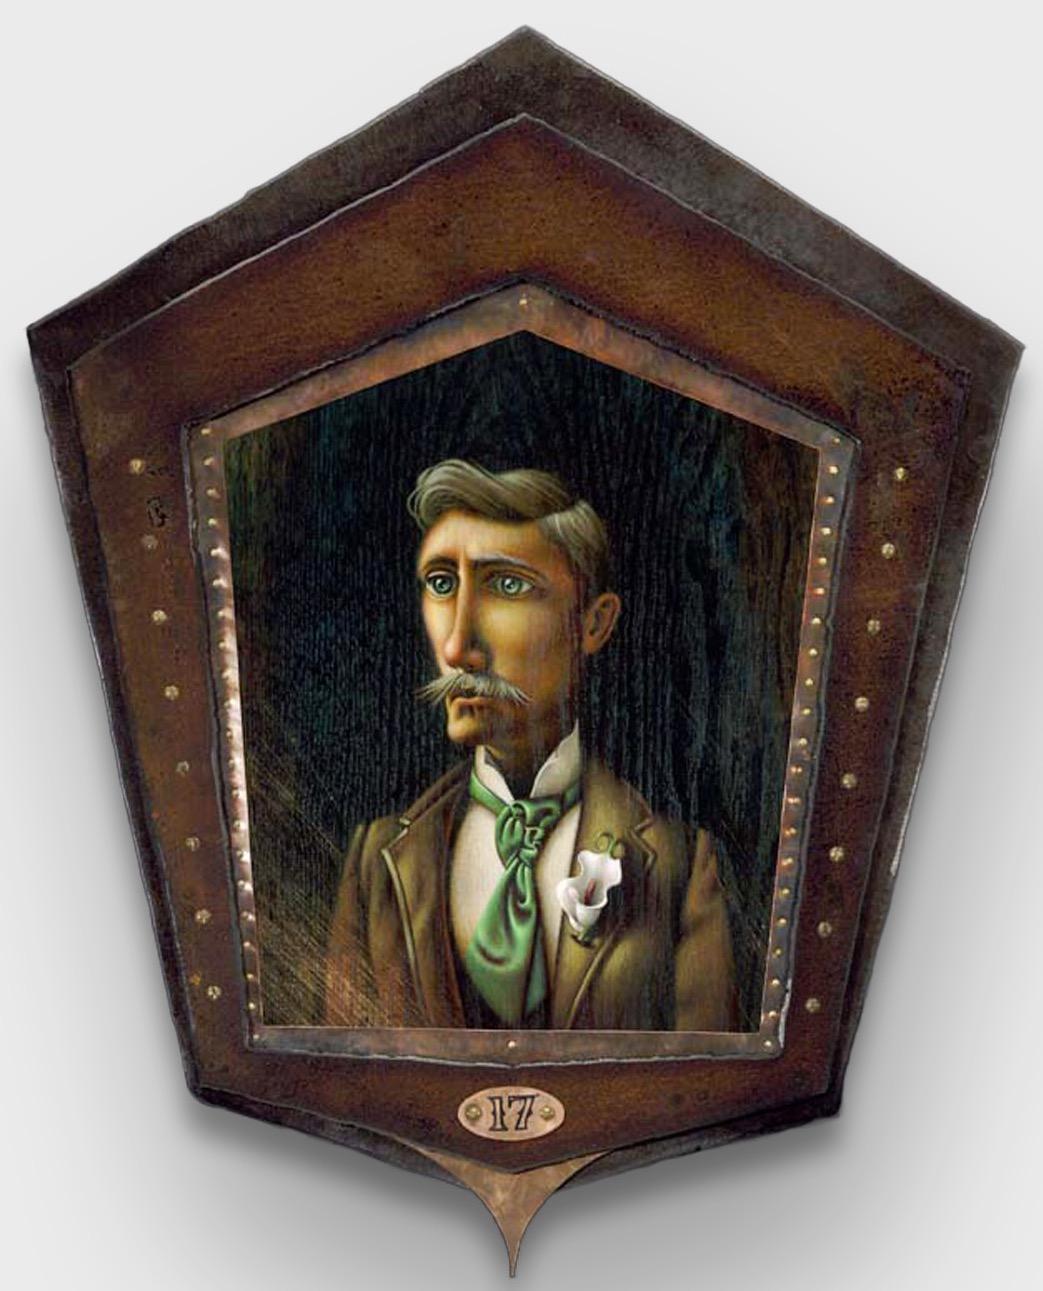 A 15” x 19” x 1” Magical Realism Acrylic Portrait Painting executed on Wood Panel with Custom Framing by artist Christopher Polentz. A certificate of authenticity will accompany the piece upon its purchase or delivery.

Chris Polentz graduated from